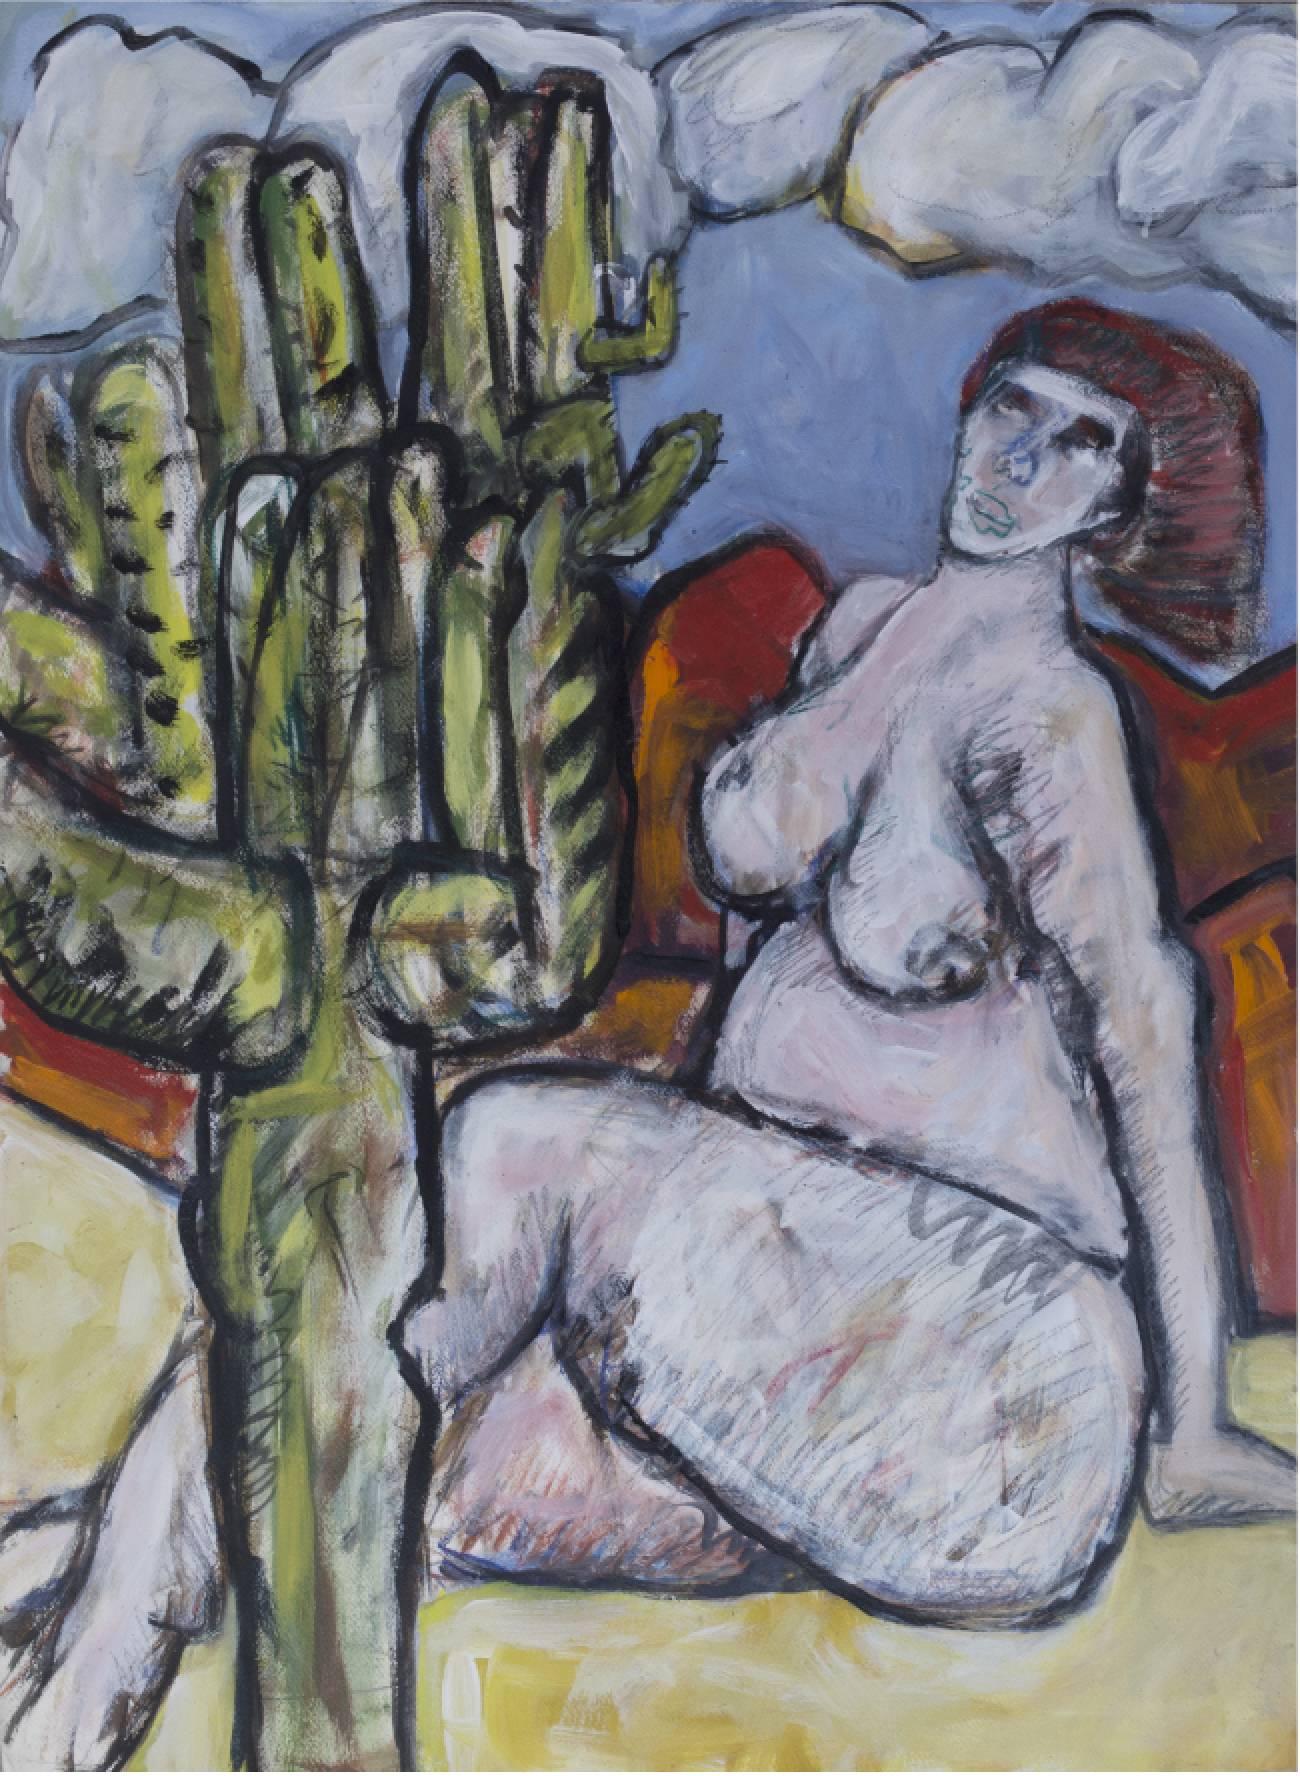 Barry Wolfryd Nude Painting - Nude with Cactus, Mixed Media on Paper, Contemporary Art